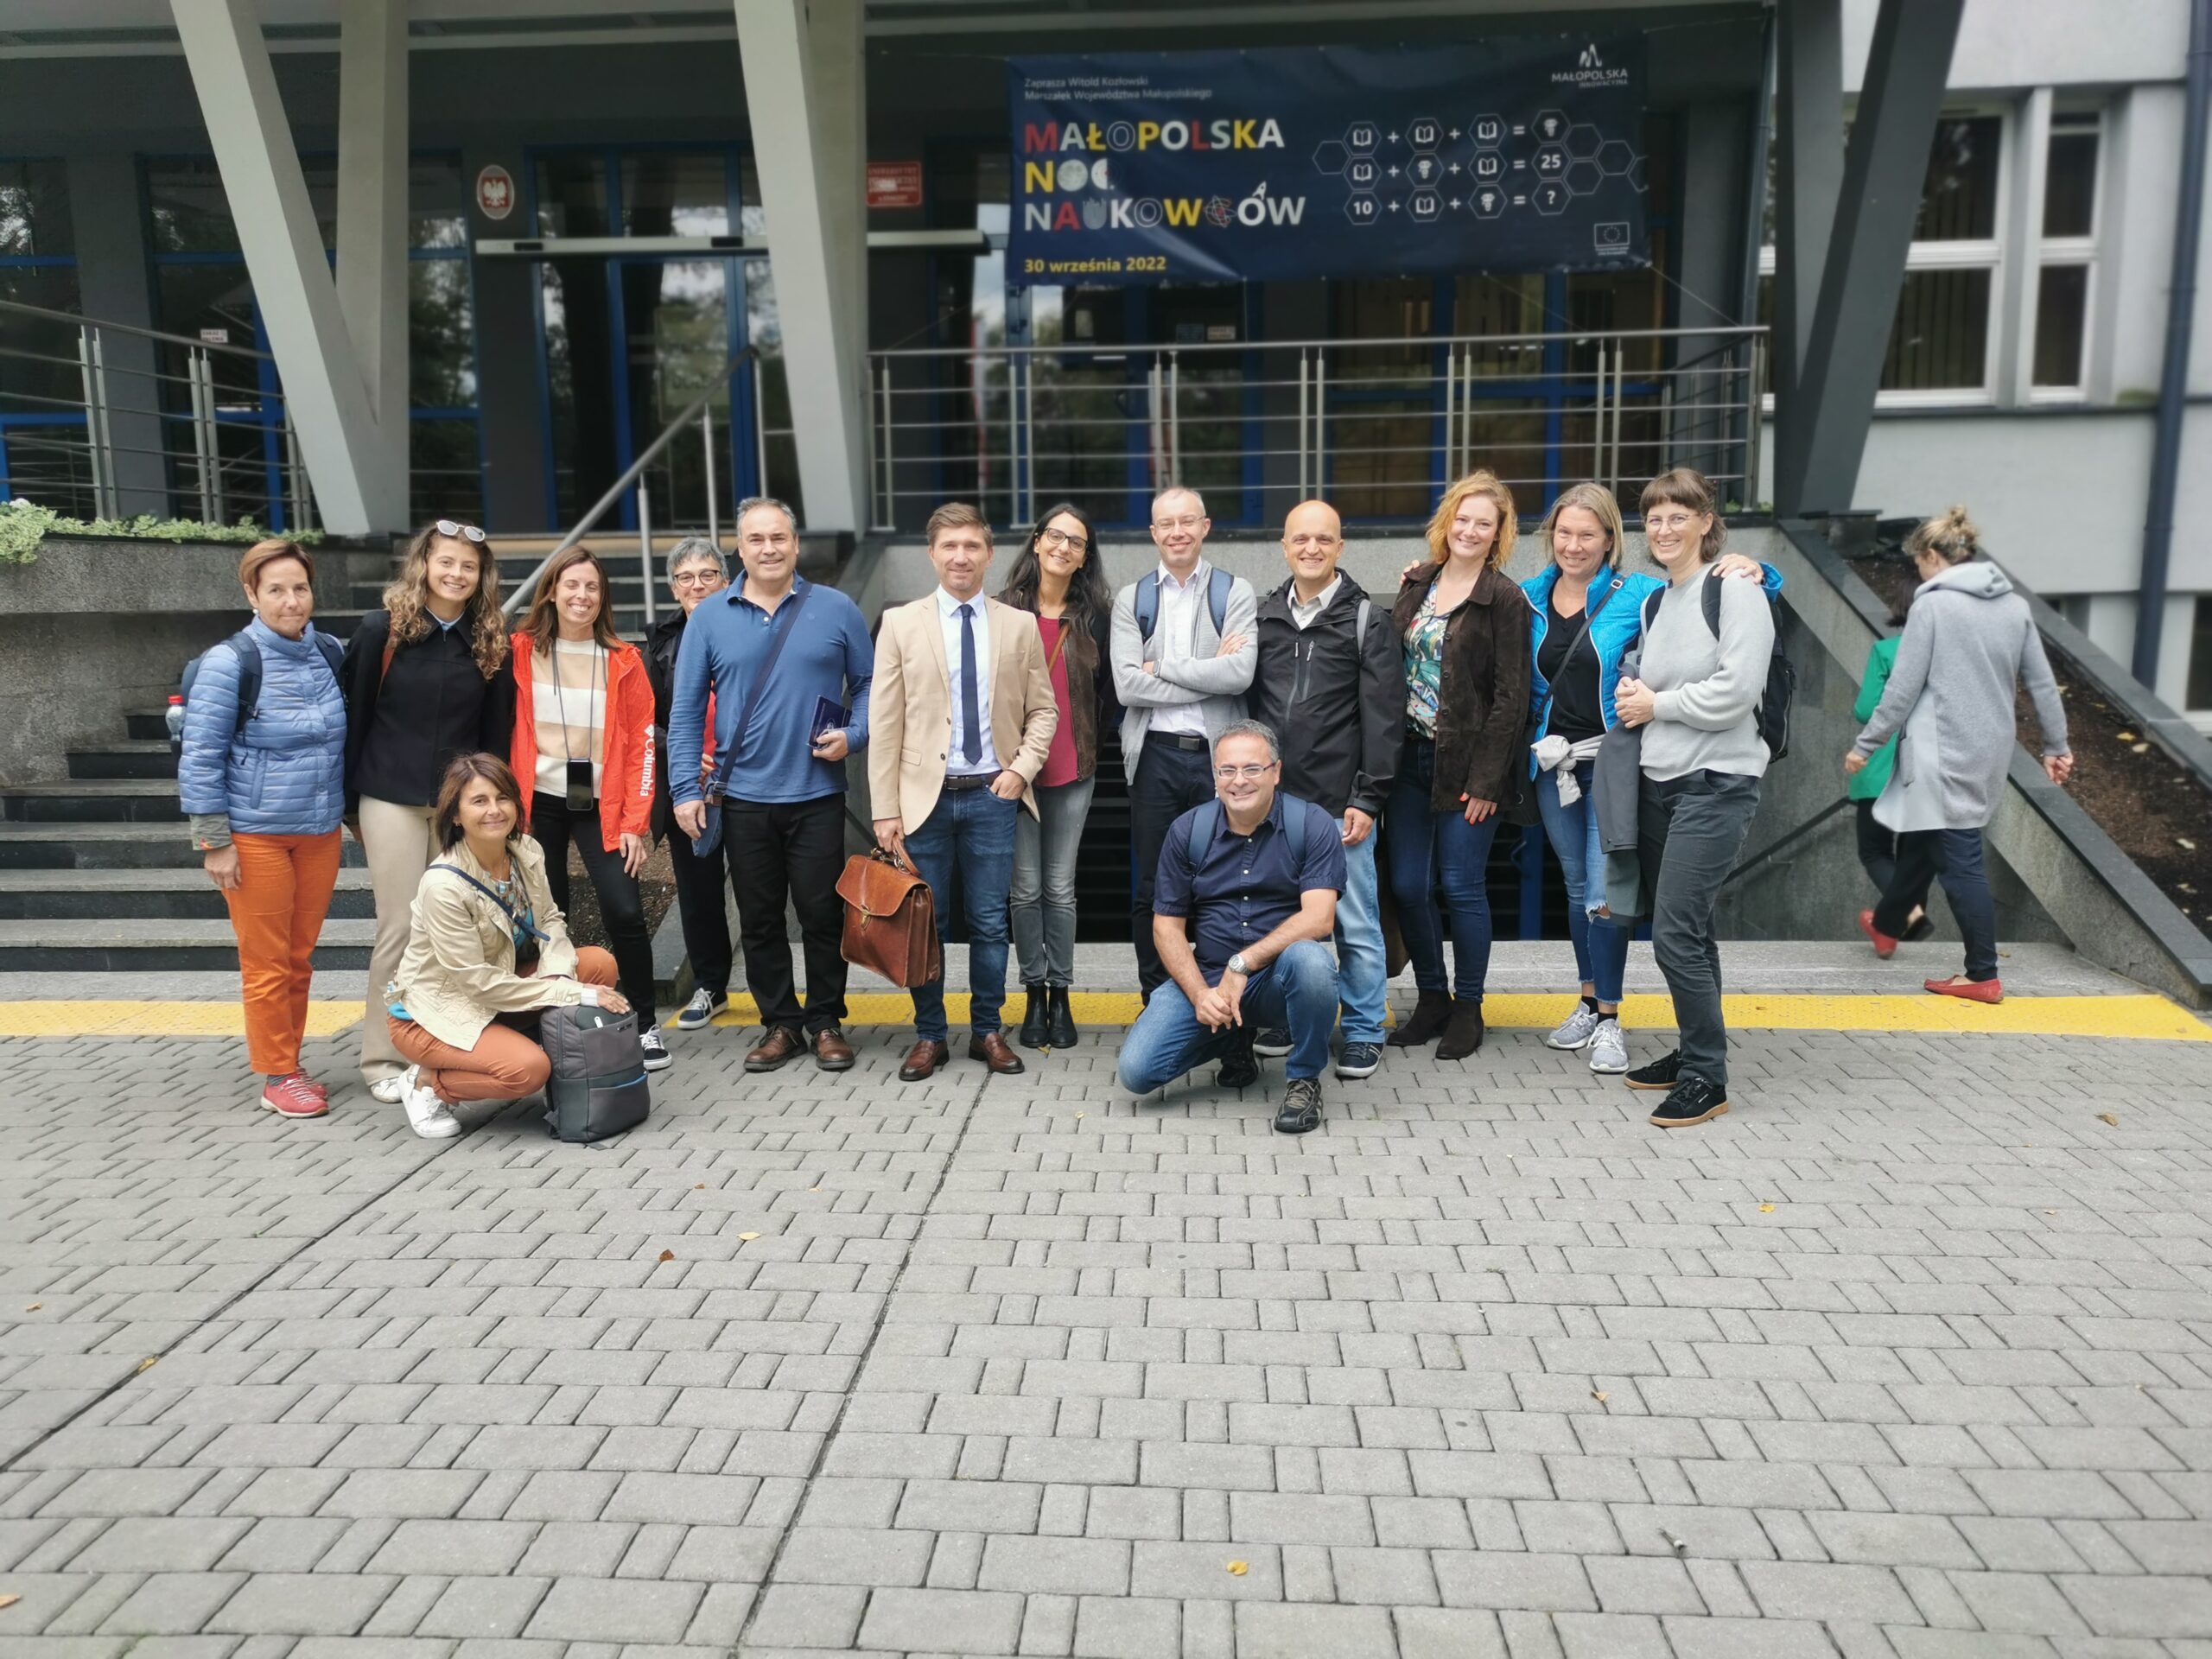 Second Transnational Meeting in Krakow